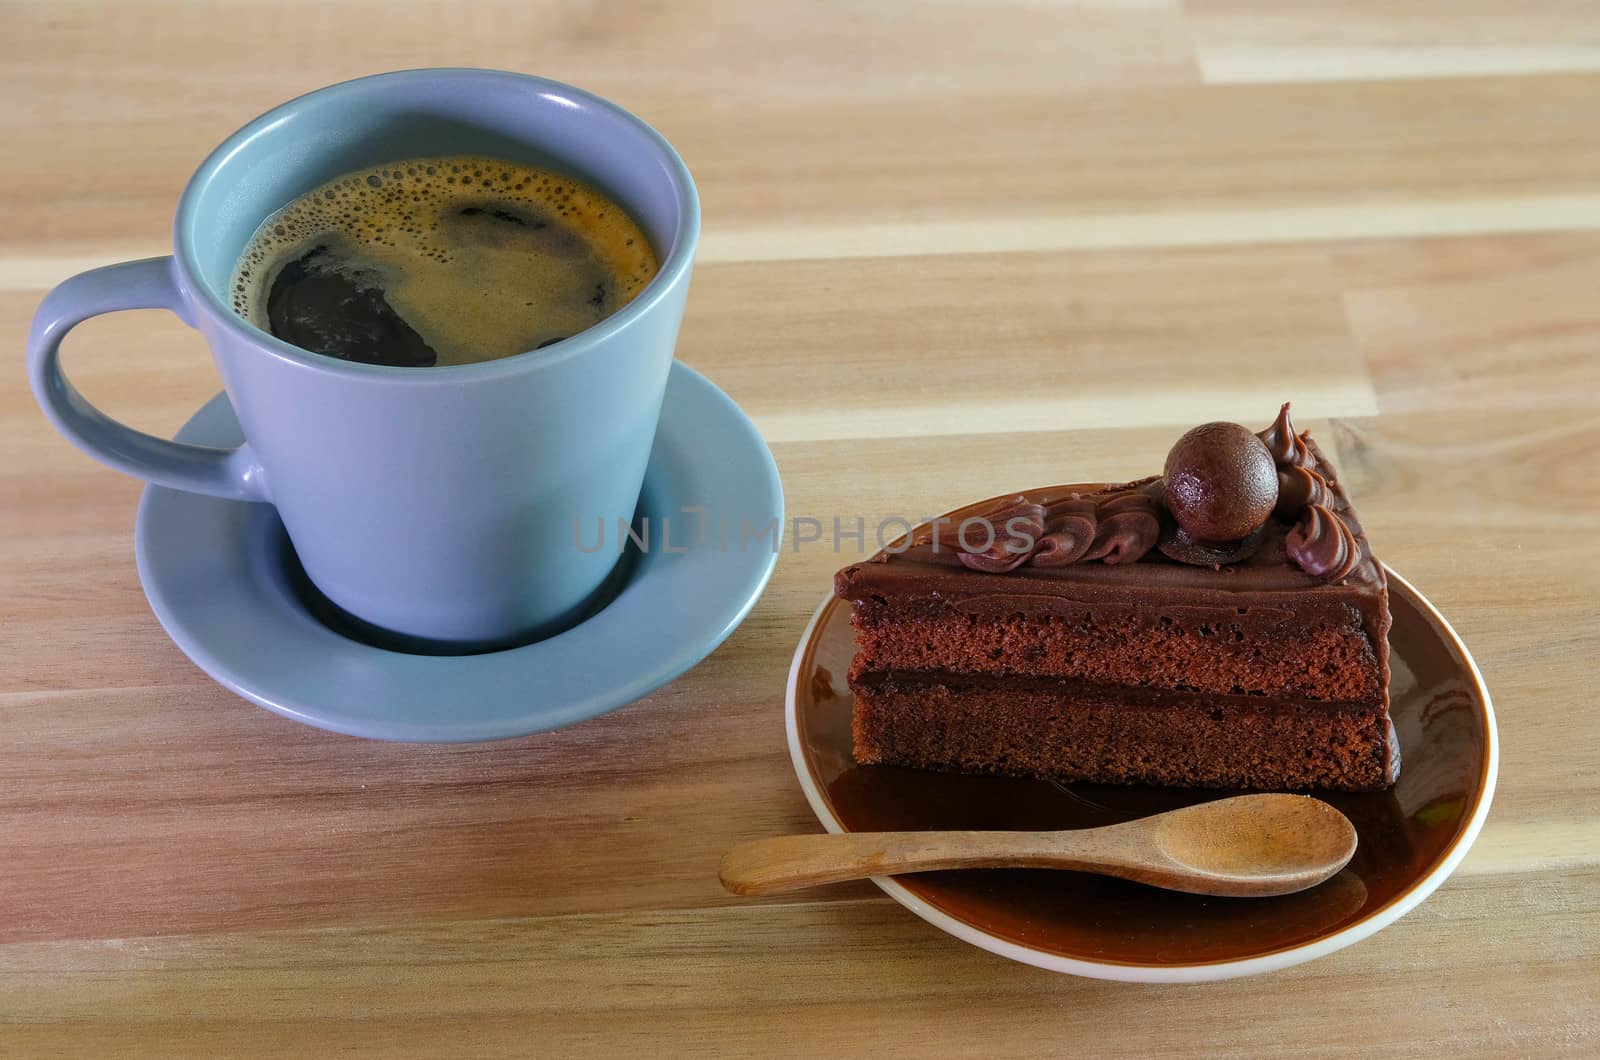 The Chocolate cake and a cup of coffee on wooden table by Bonn2210